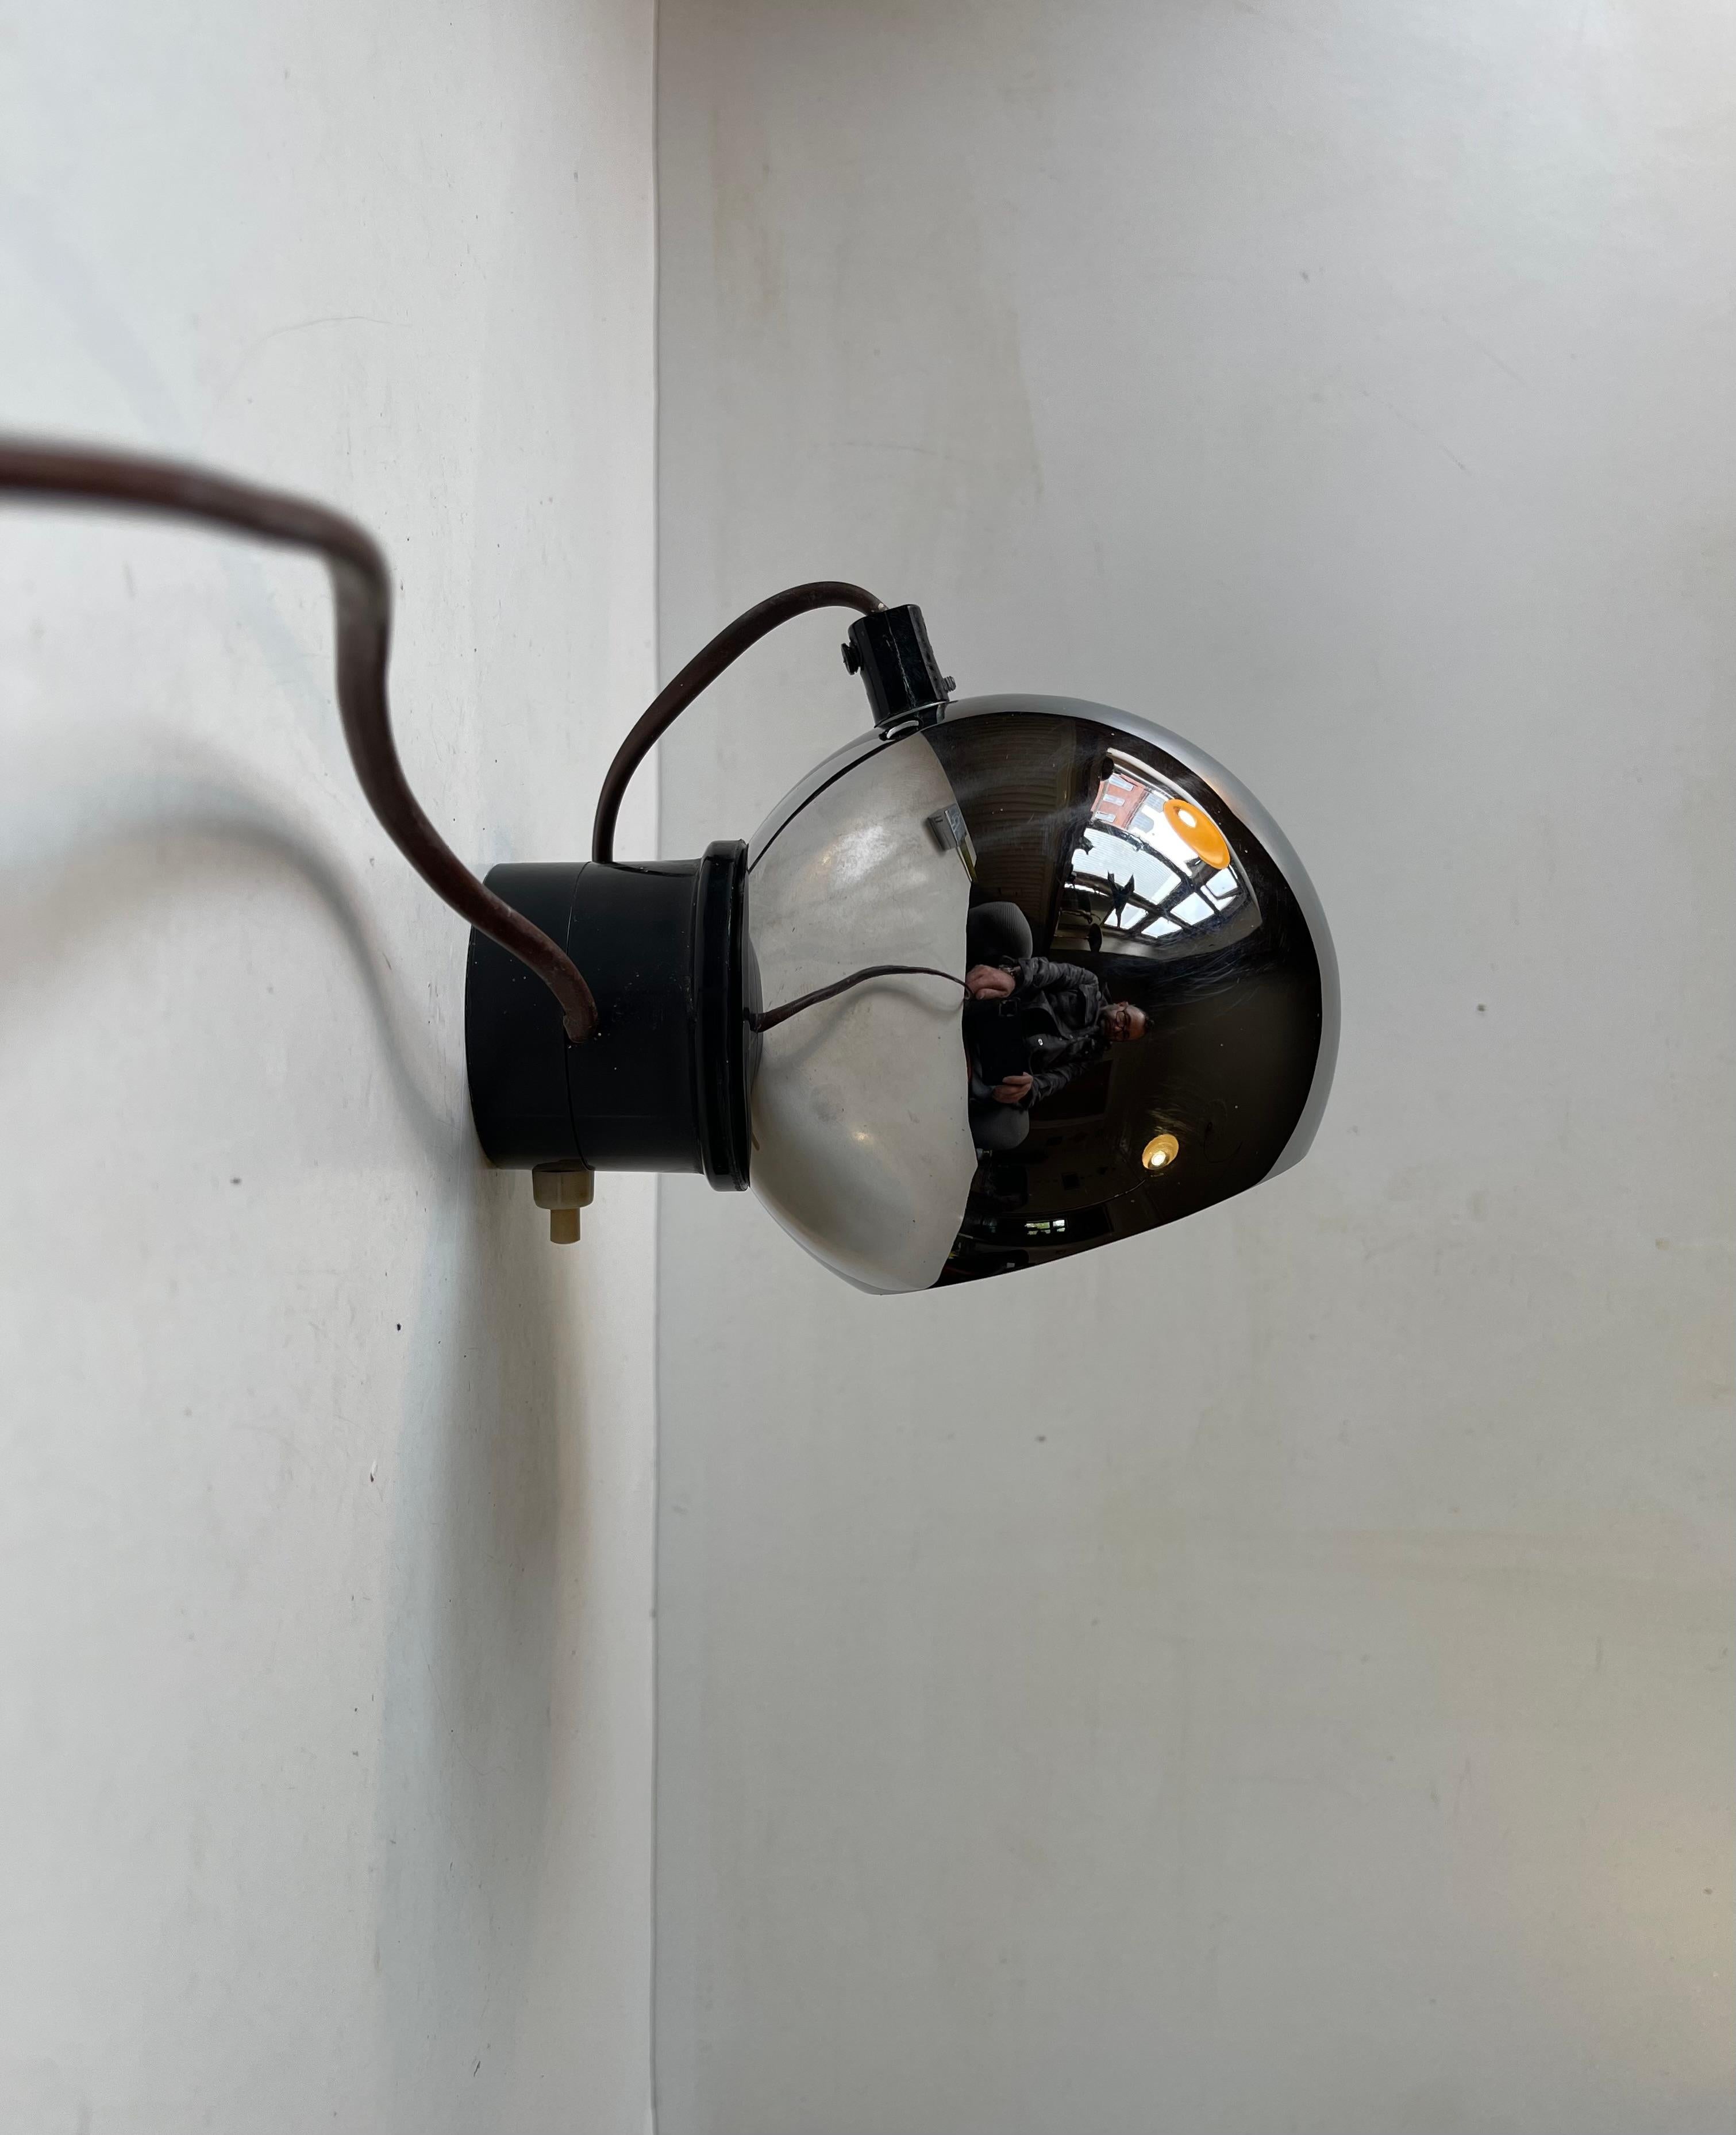 A very versatile wall light that can be adjusted in every direction due to its magnetic wall mount. It is commonly referred to as an eye-ball sconce for obvious reasons. Inspired by Verner Panton's Topan from 1962 this particular example was